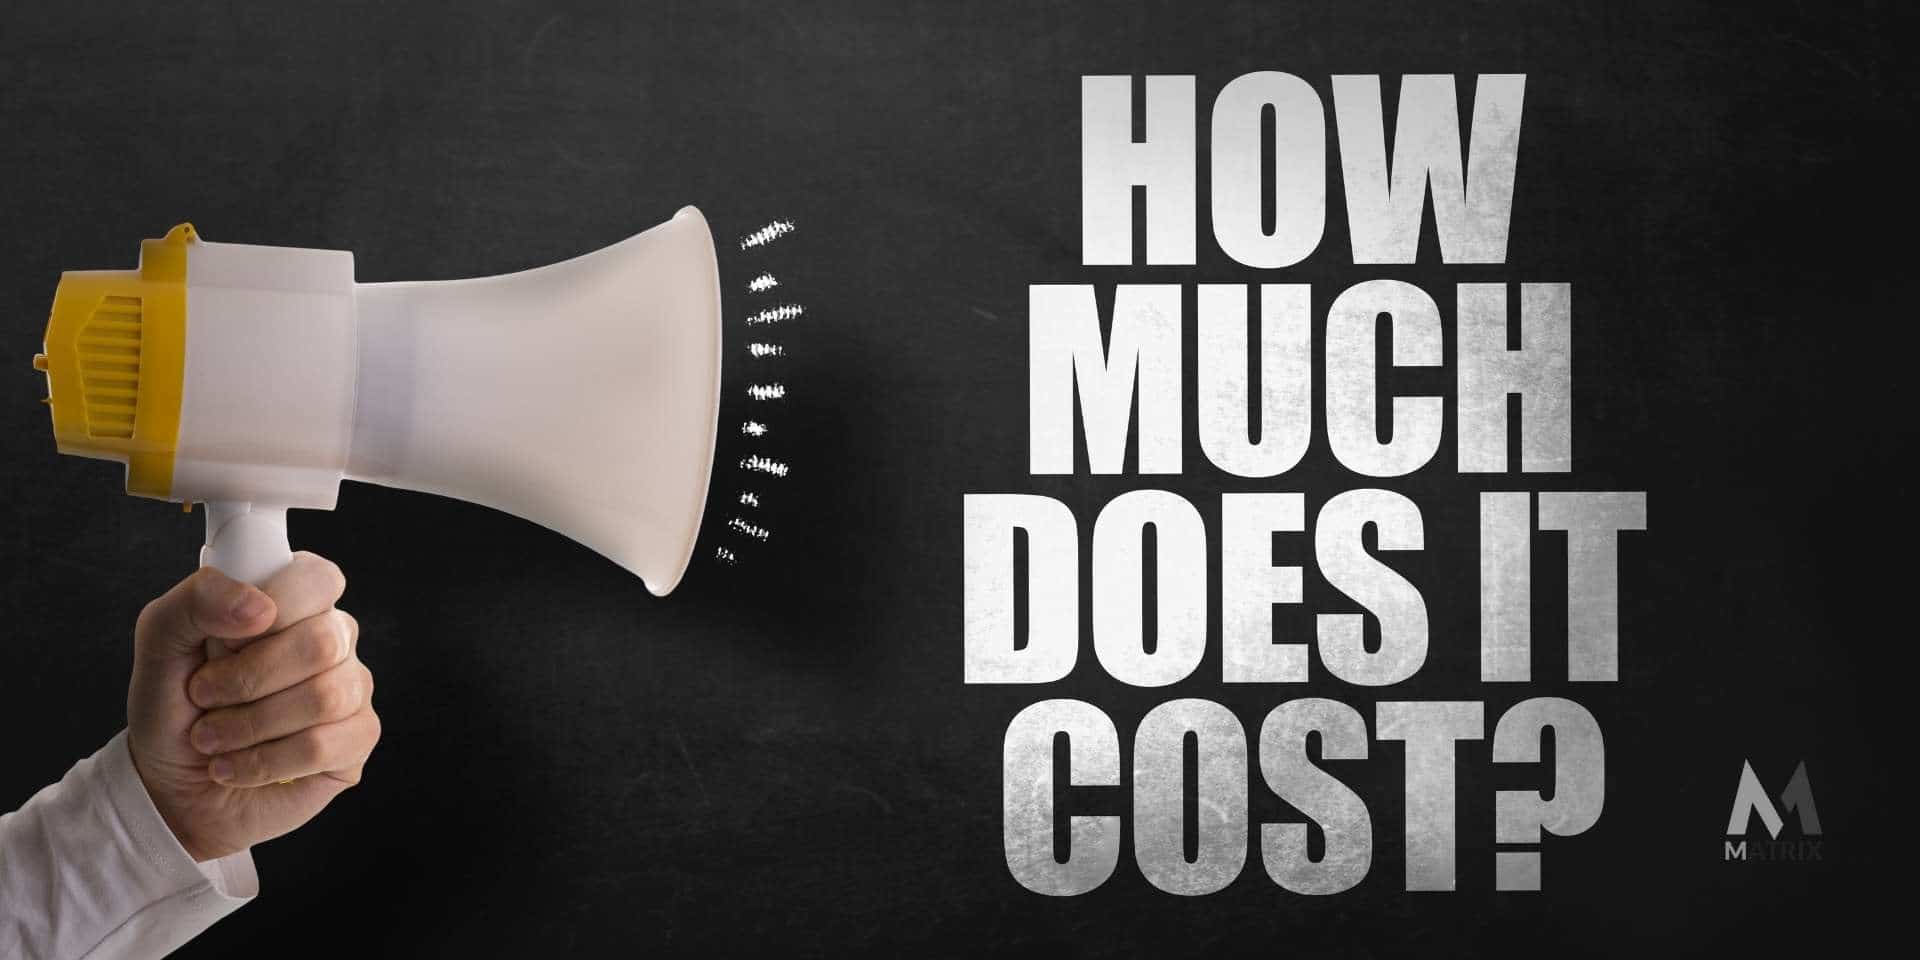 How to calculate customer acquisition cost